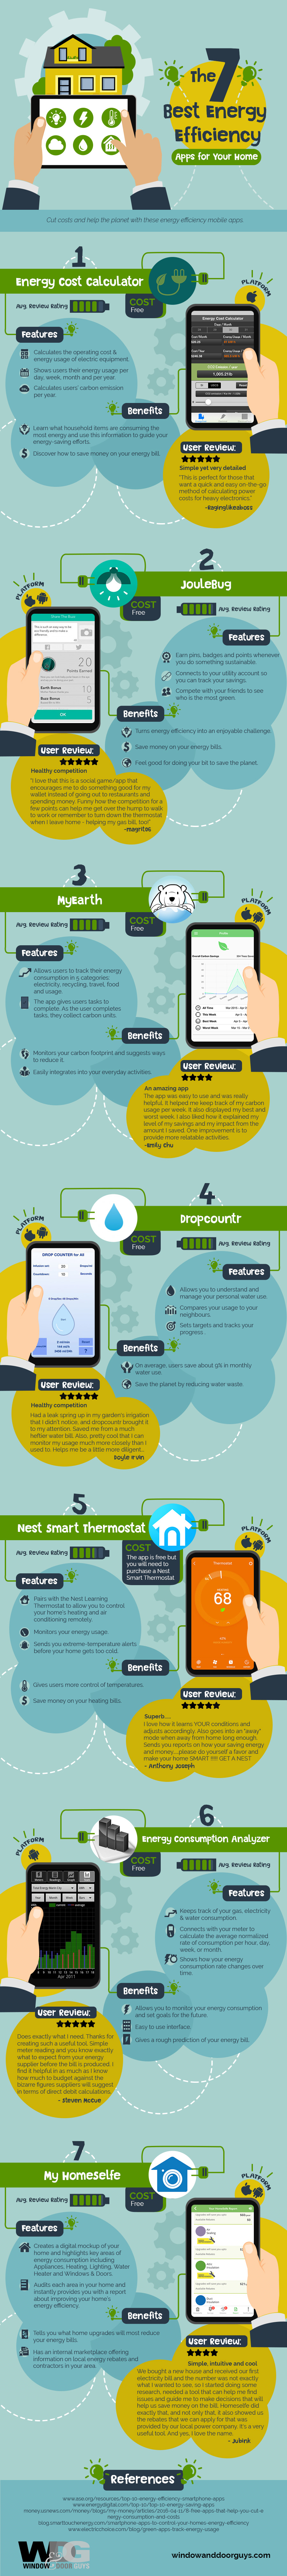 the-7-best-energy-efficiency-apps-for-your-home-infographic